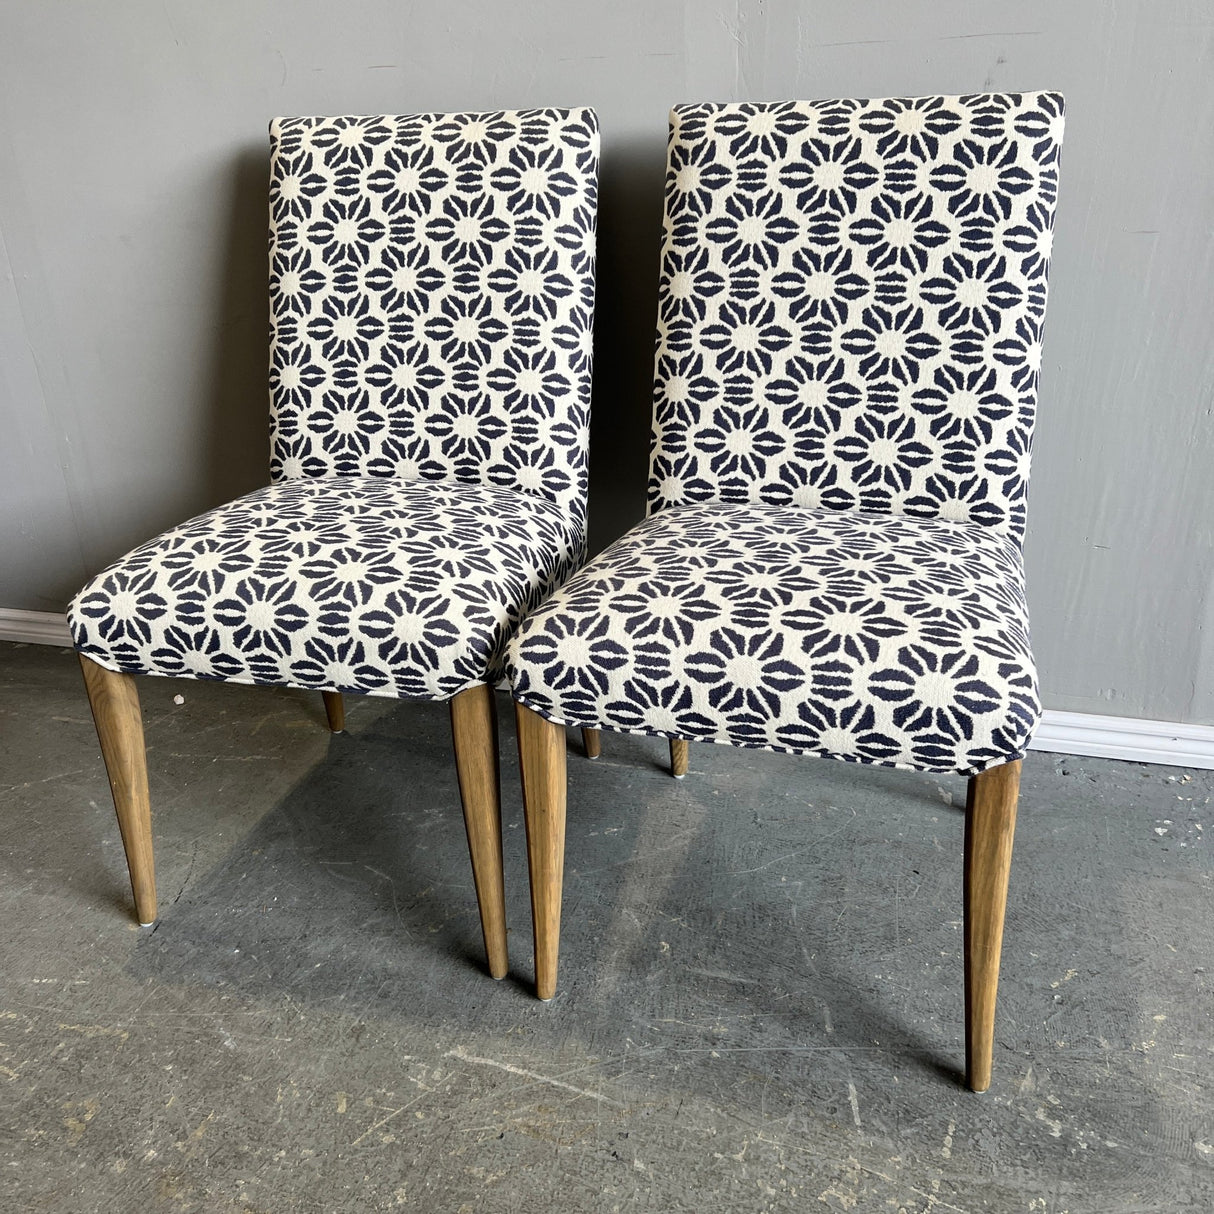 Anthropologie pair of dining chairs - enliven mart